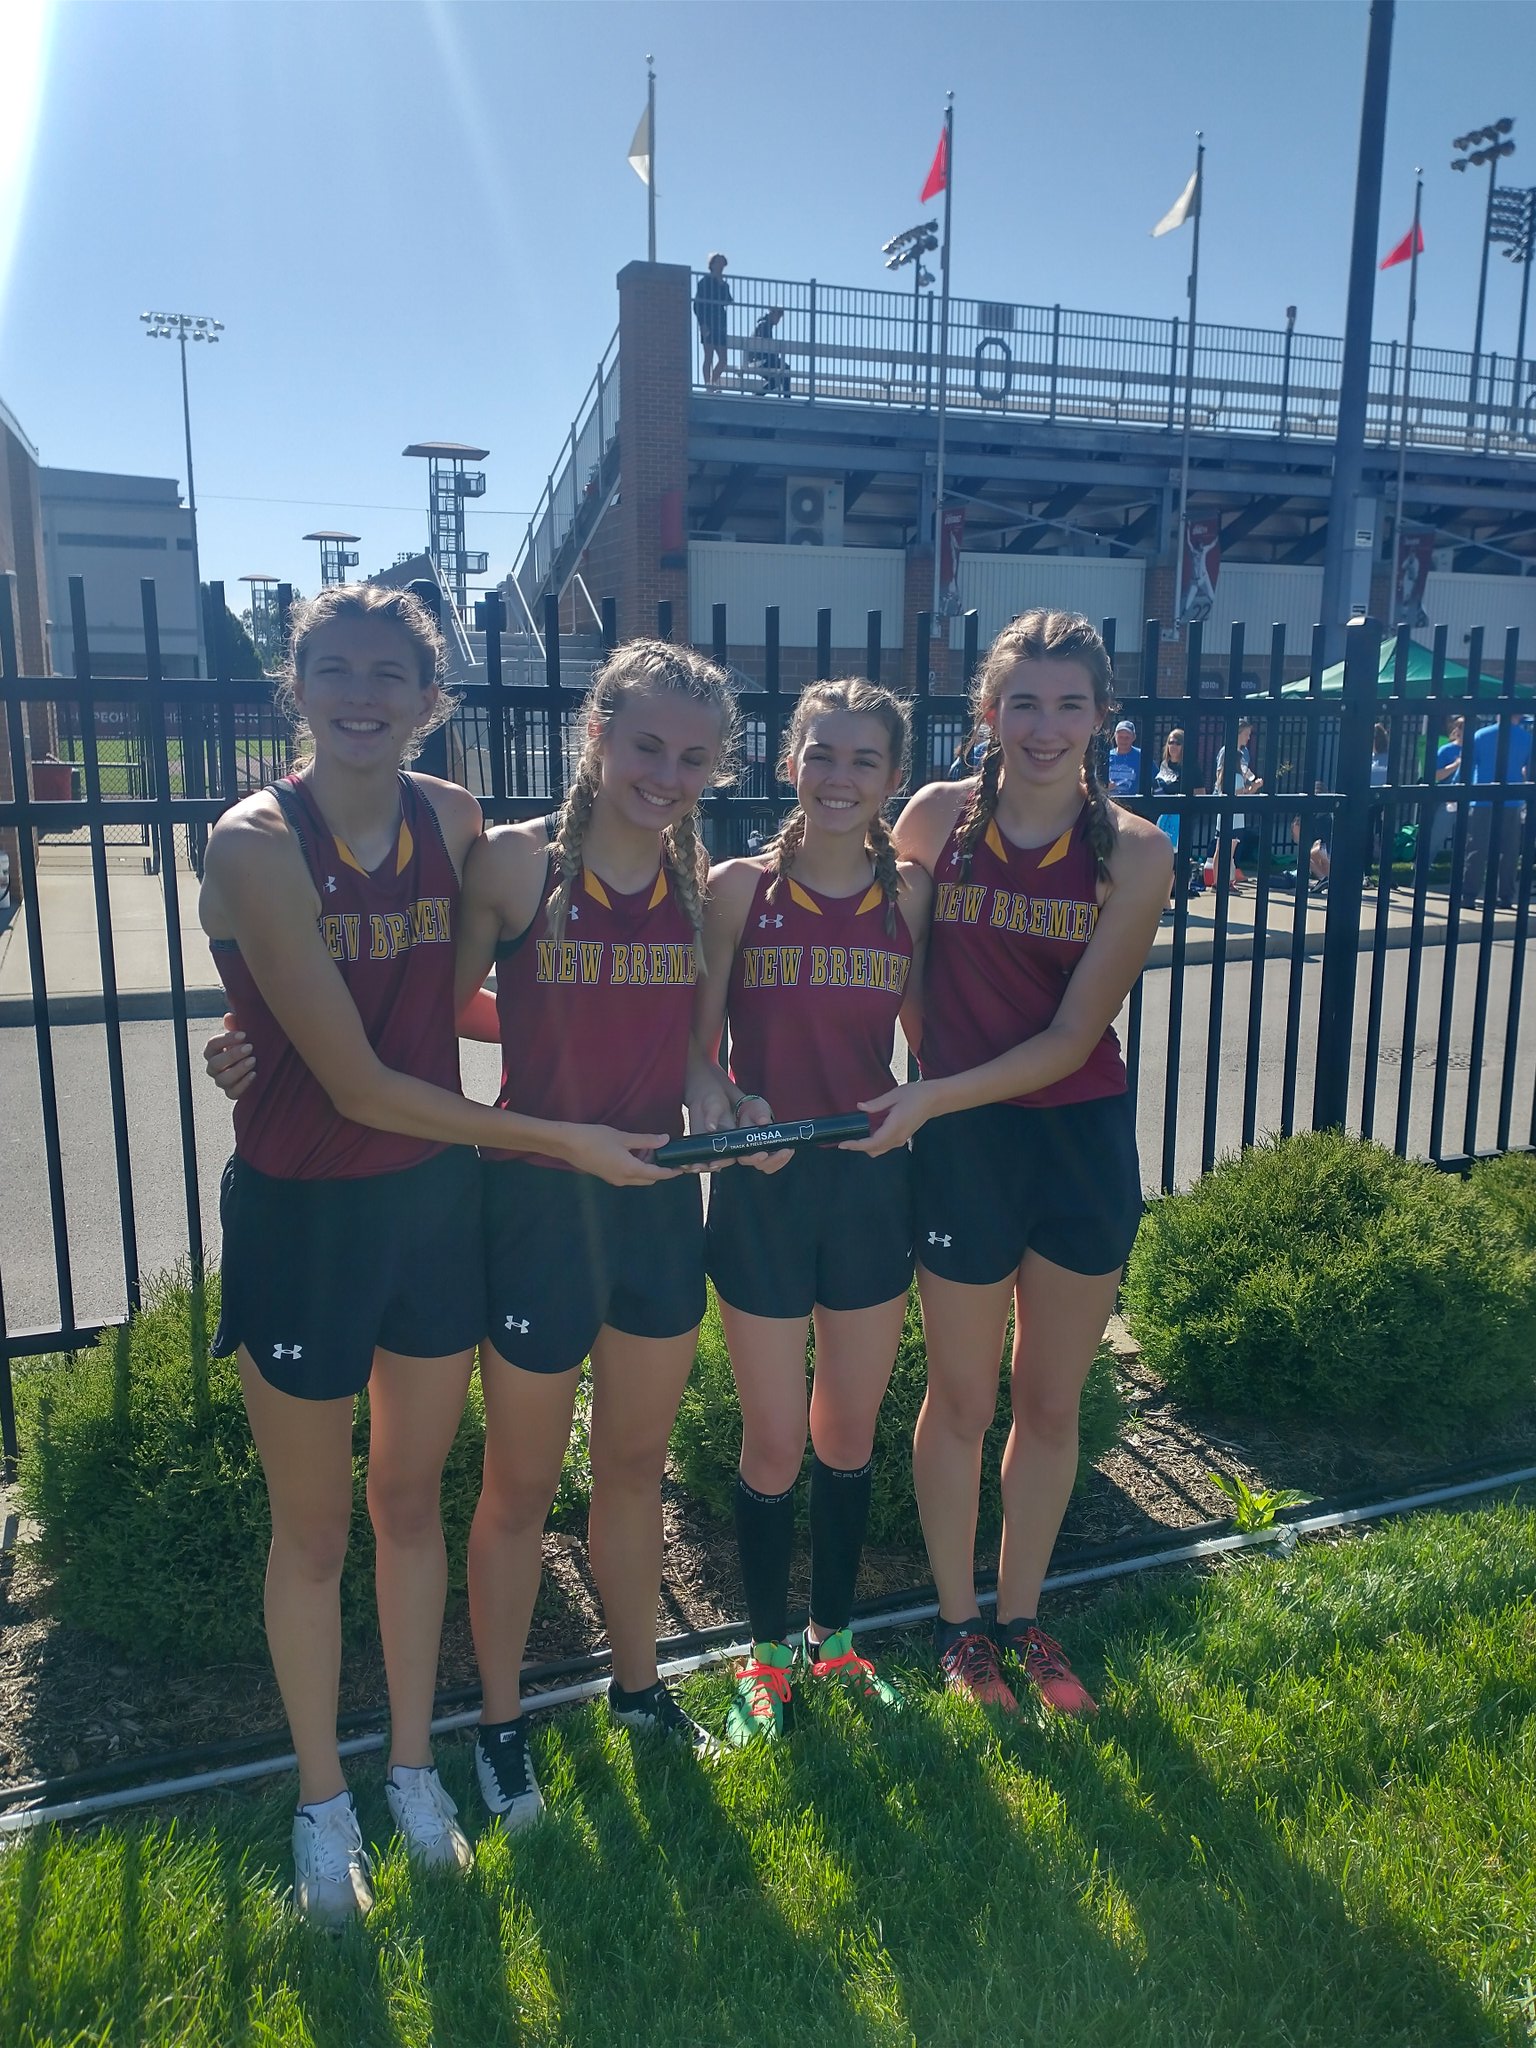 New Bremen Track Field Girls Finished 9th With A Season Best Of 9 58 Congratulations Caroline Whitlatch Mia Hirschfeld Molly Dues And Chloe Homan On A Great Finish To An